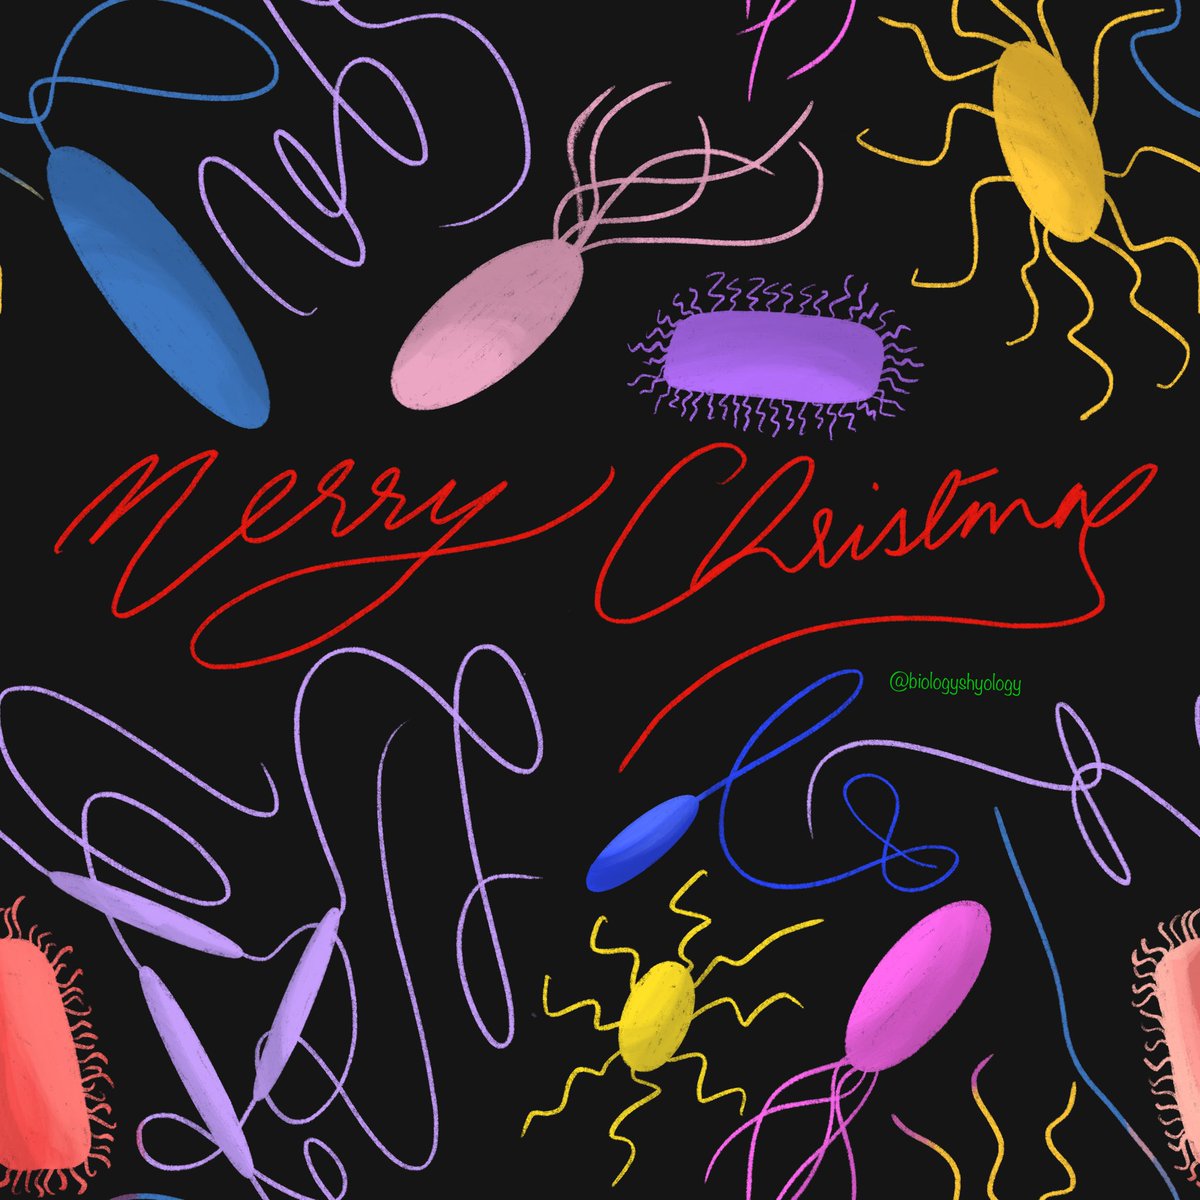 All the bacteria wish you a Merry Christmas! 

@IAmSciArt #scienceart